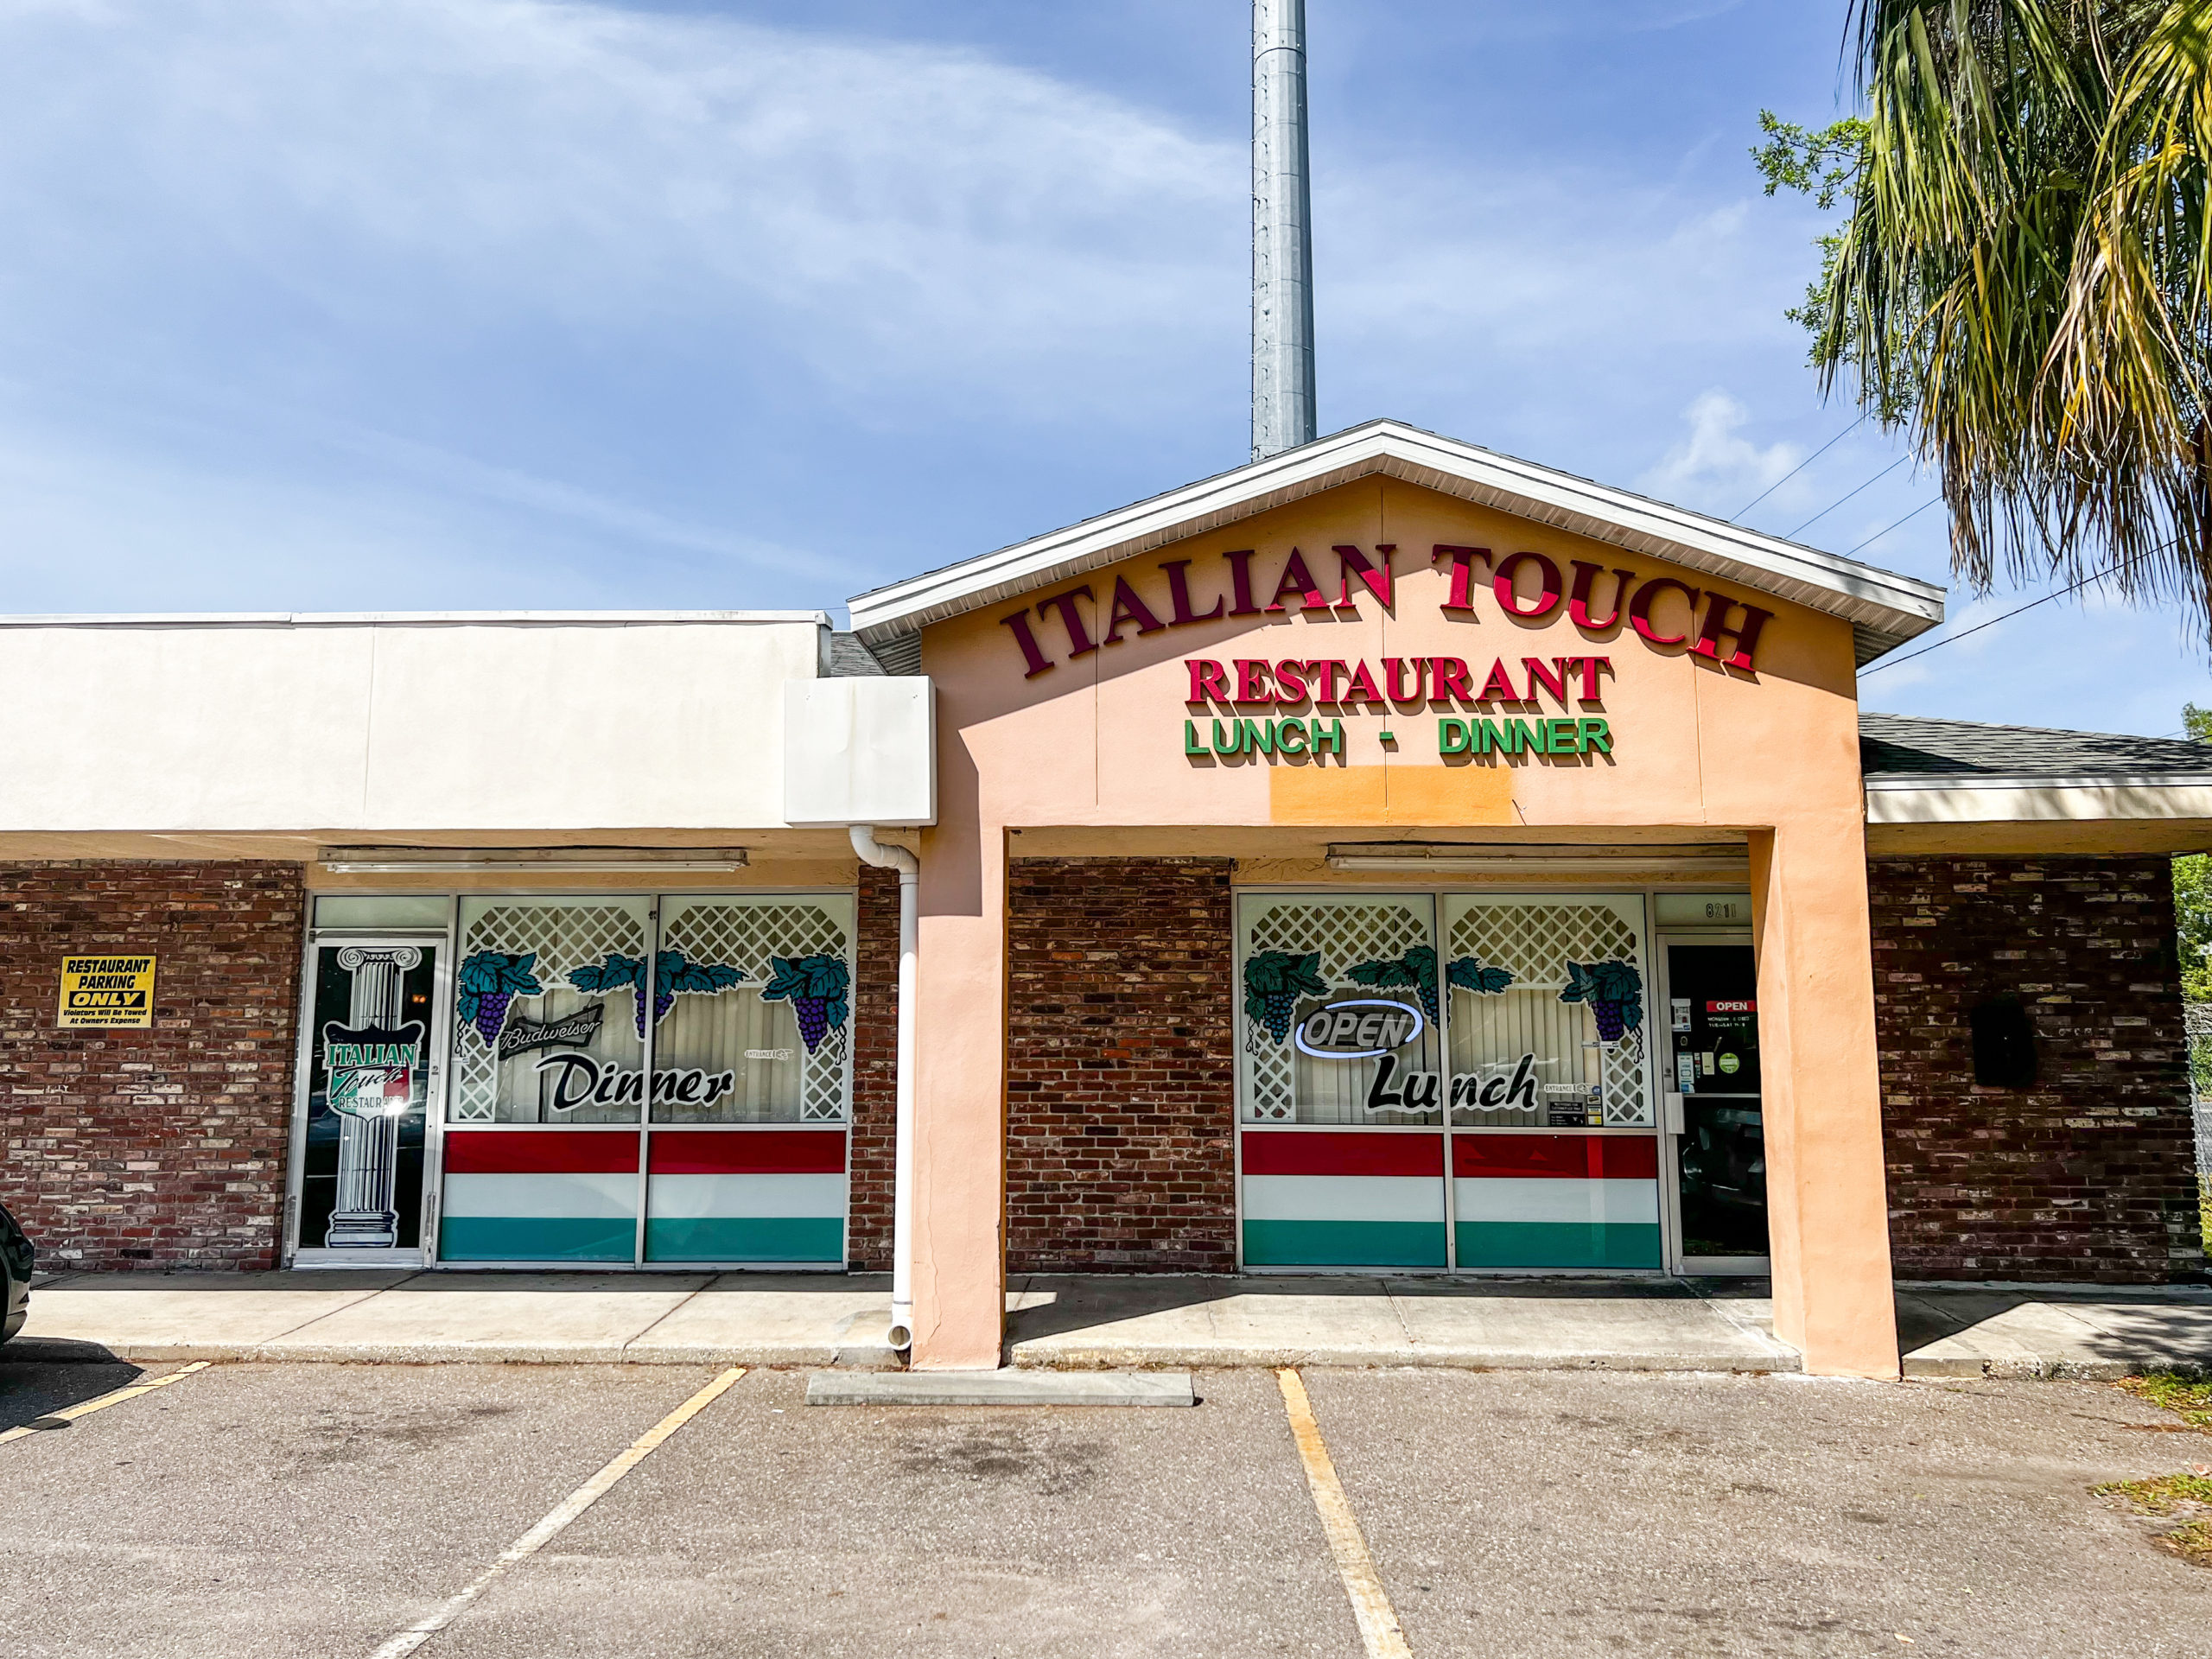 The entrance to Italian Touch located on the corner of Park St. N. and 46th Ave N.